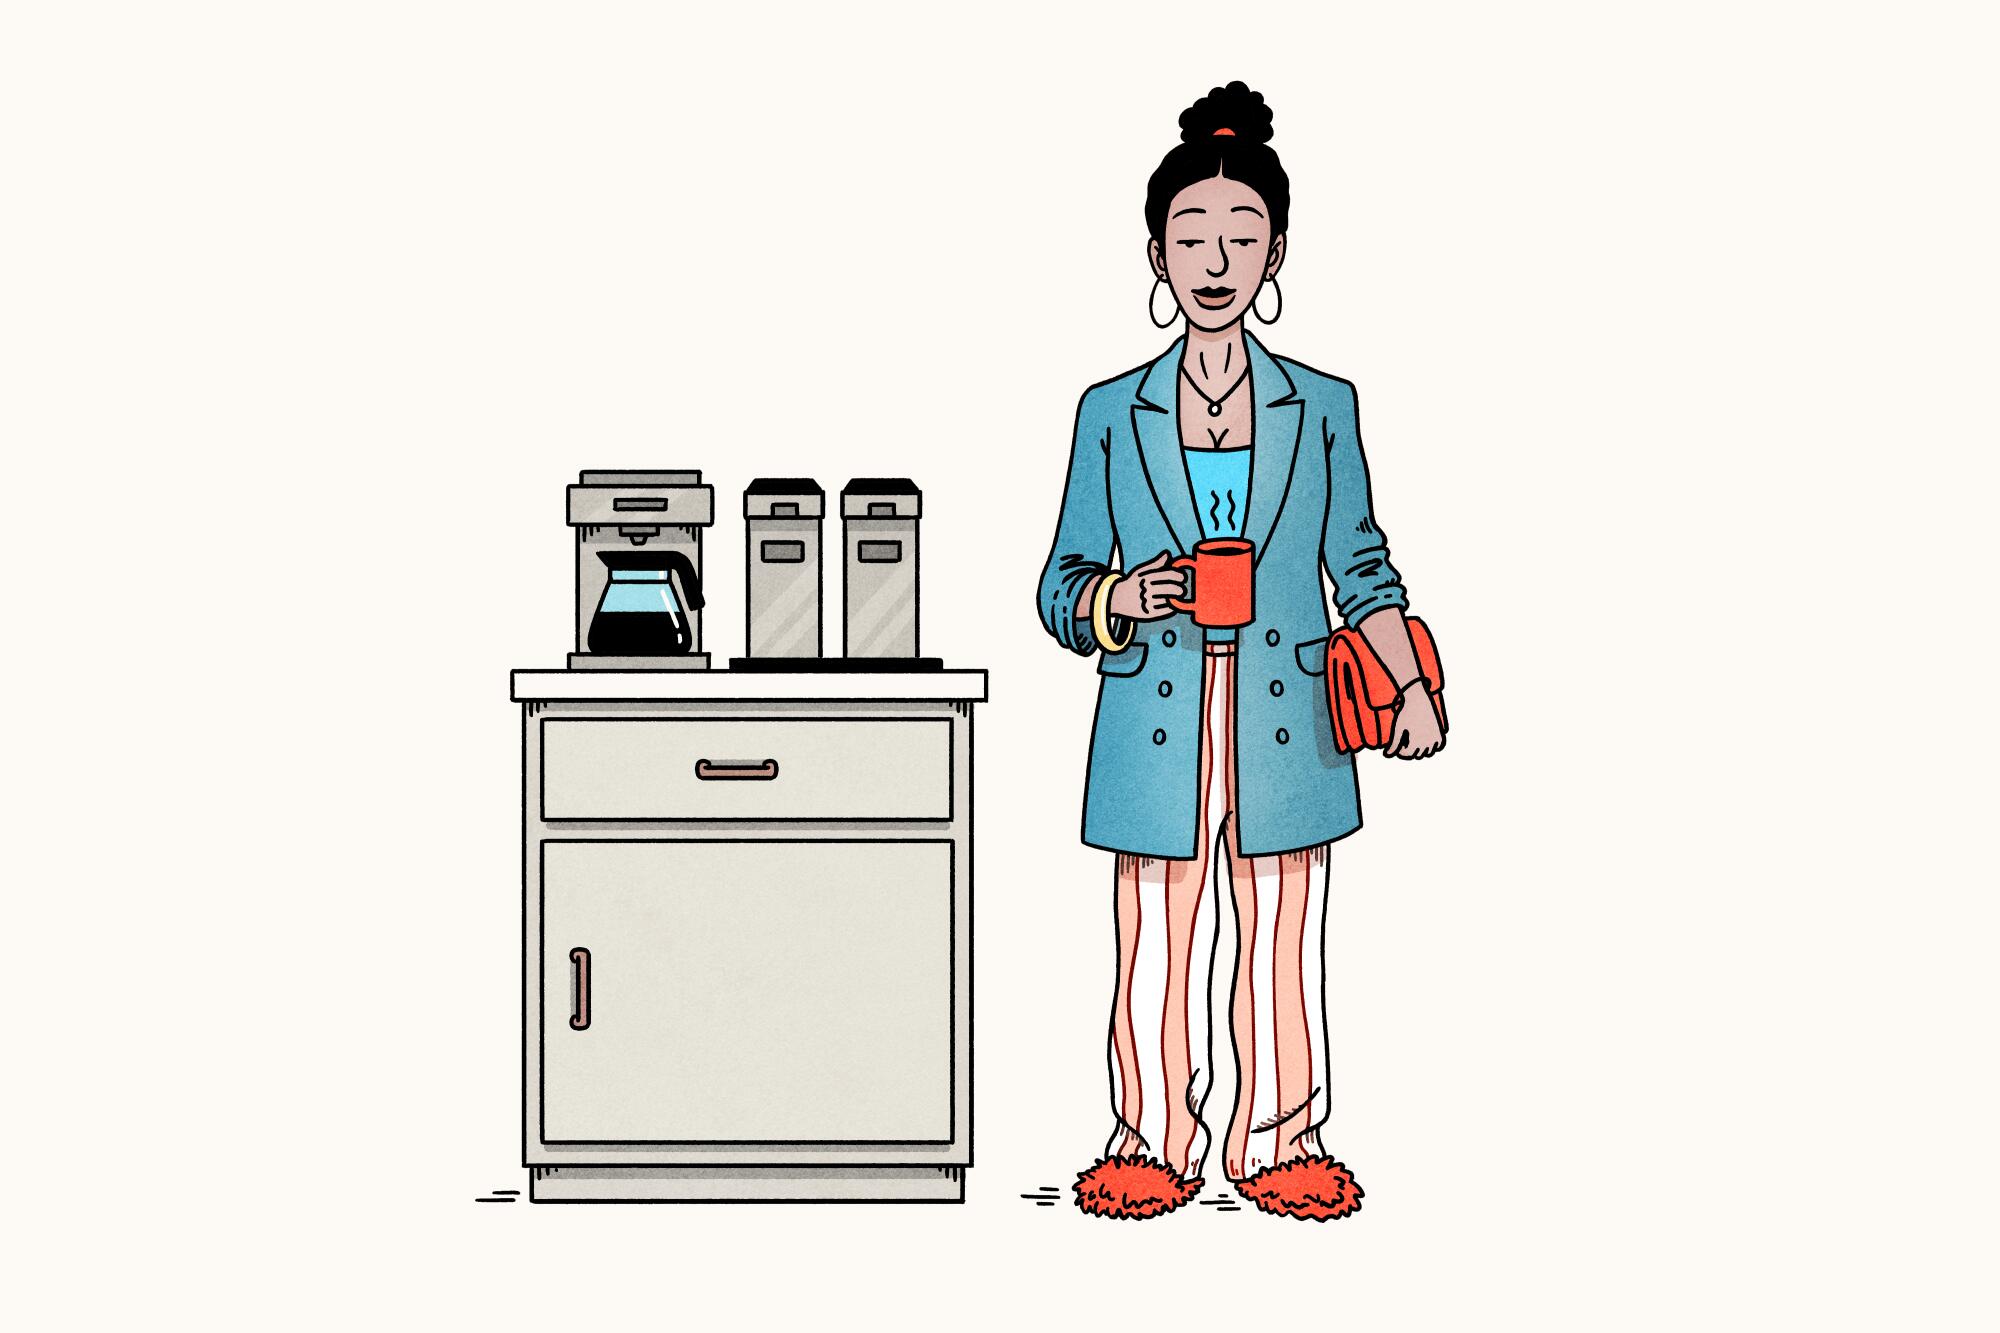 Illustration of a woman wearing a blazer and pajamas getting coffee from an office coffee maker.